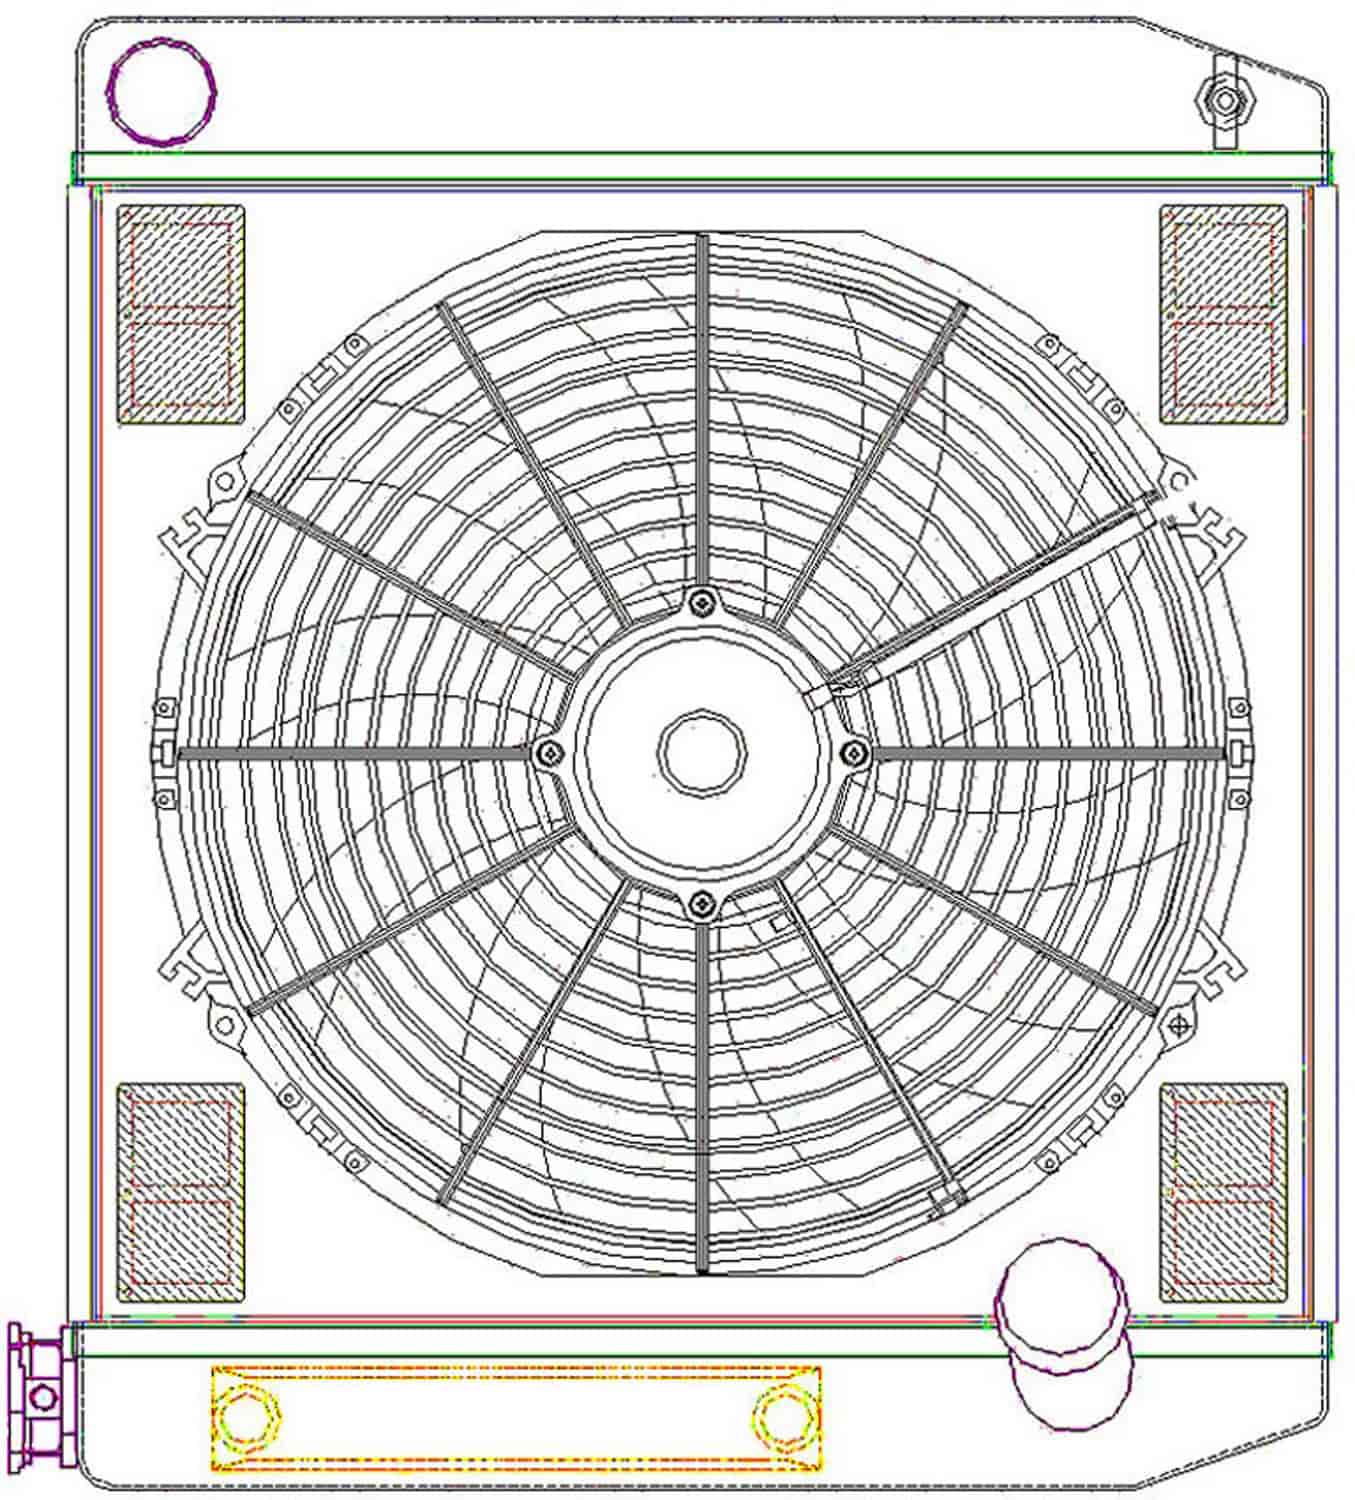 ClassicCool ComboUnit Universal Fit Radiator and Fan Single Pass Crossflow Design 22" x 19" with Transmission Cooler